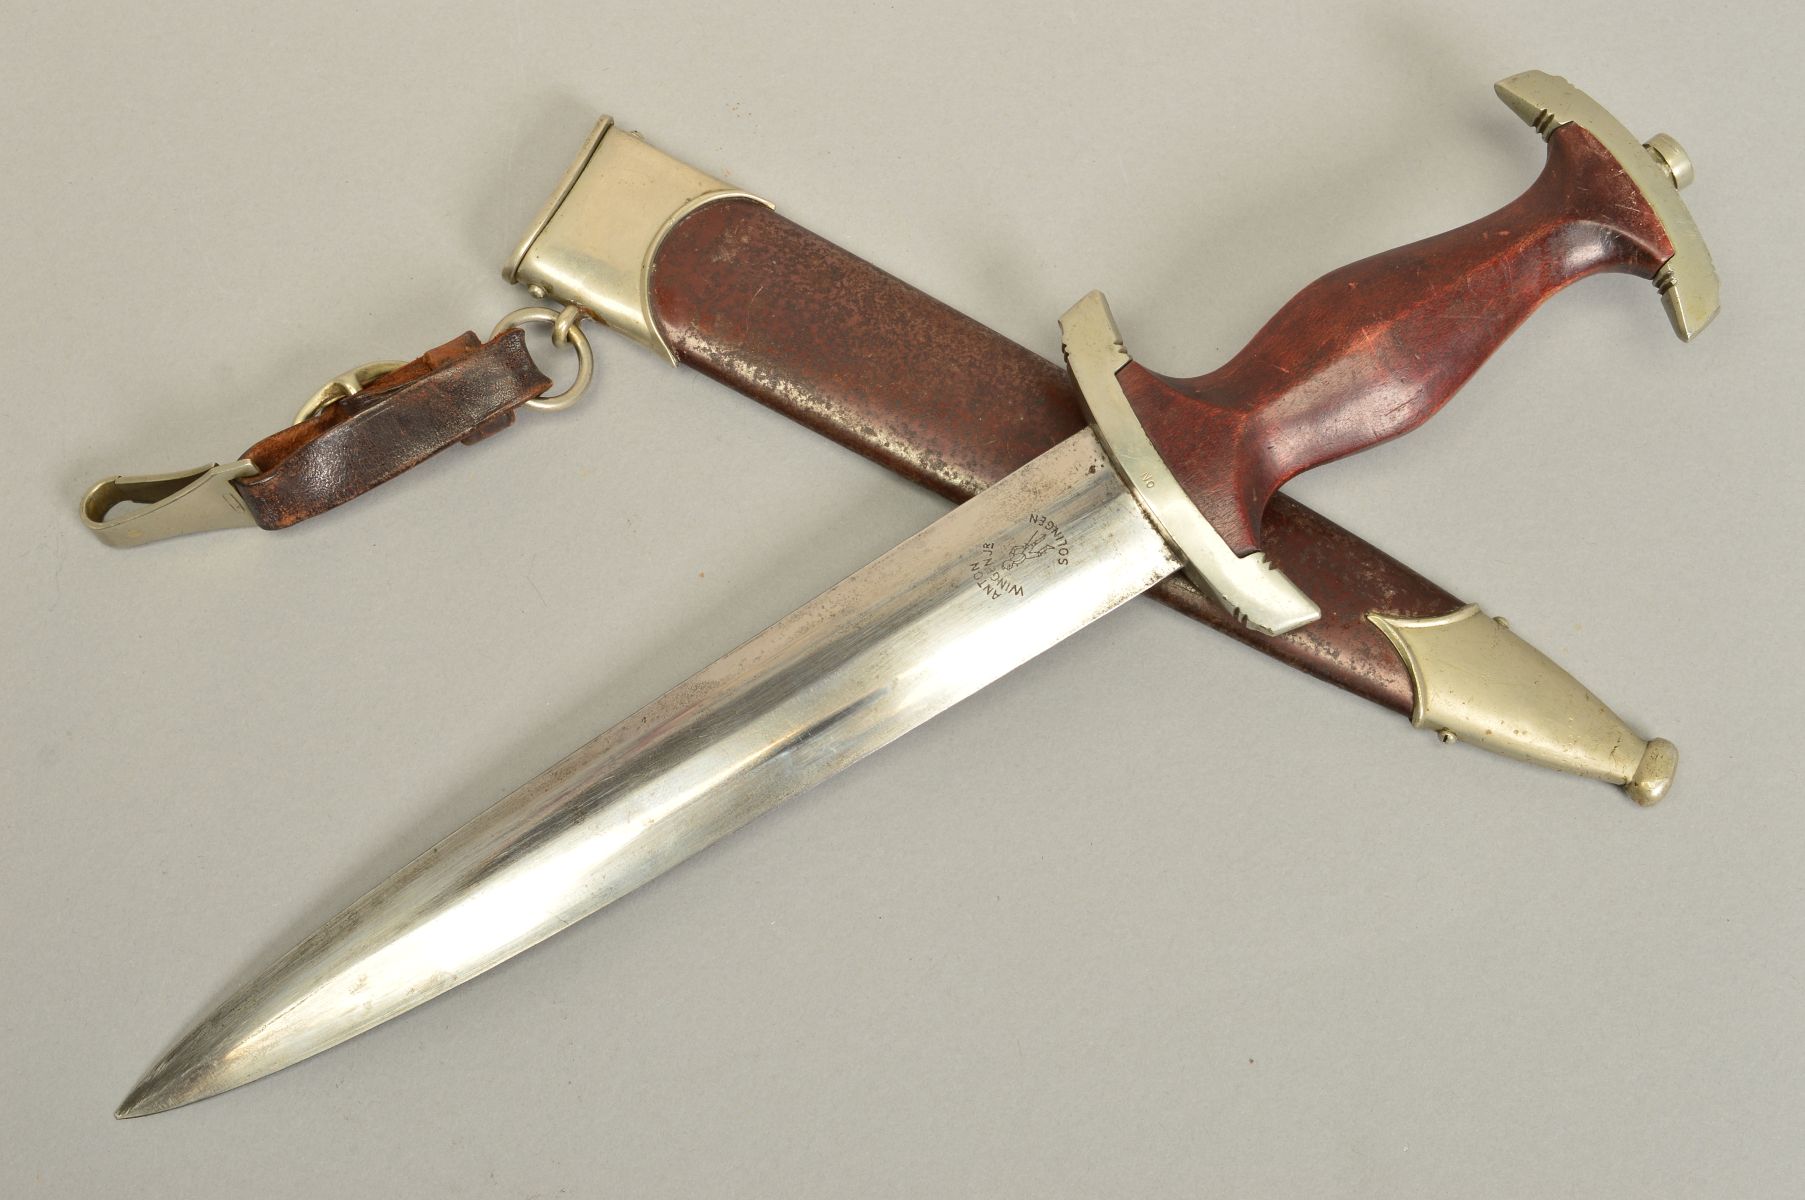 A GERMAN 3RD REICH ISSUE 'SA' DAGGER AND SCABBARD, the grip has the usual SA logo and Eagle swastika - Image 4 of 6